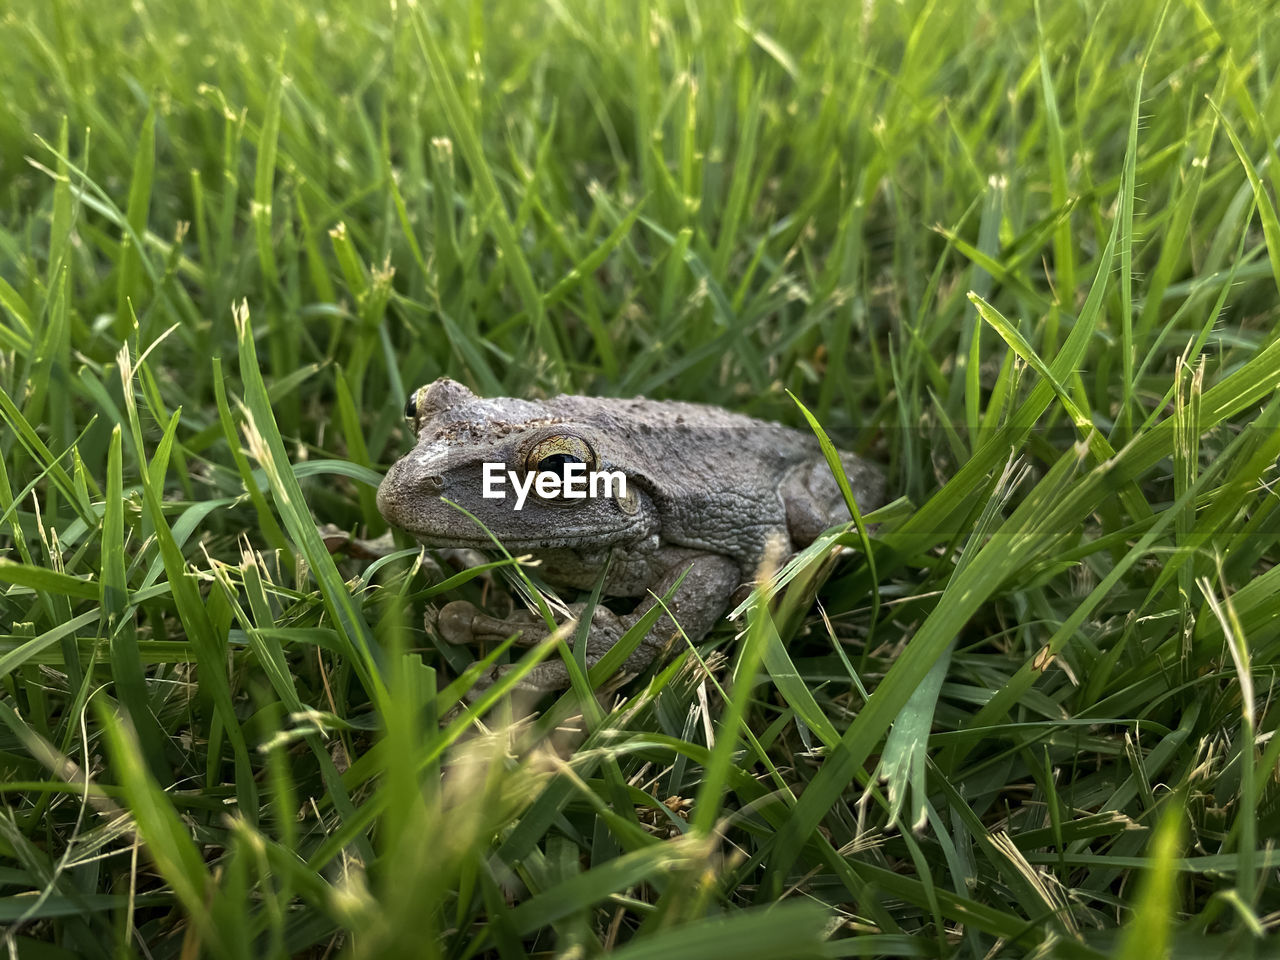 CLOSE-UP OF A FROG ON FIELD